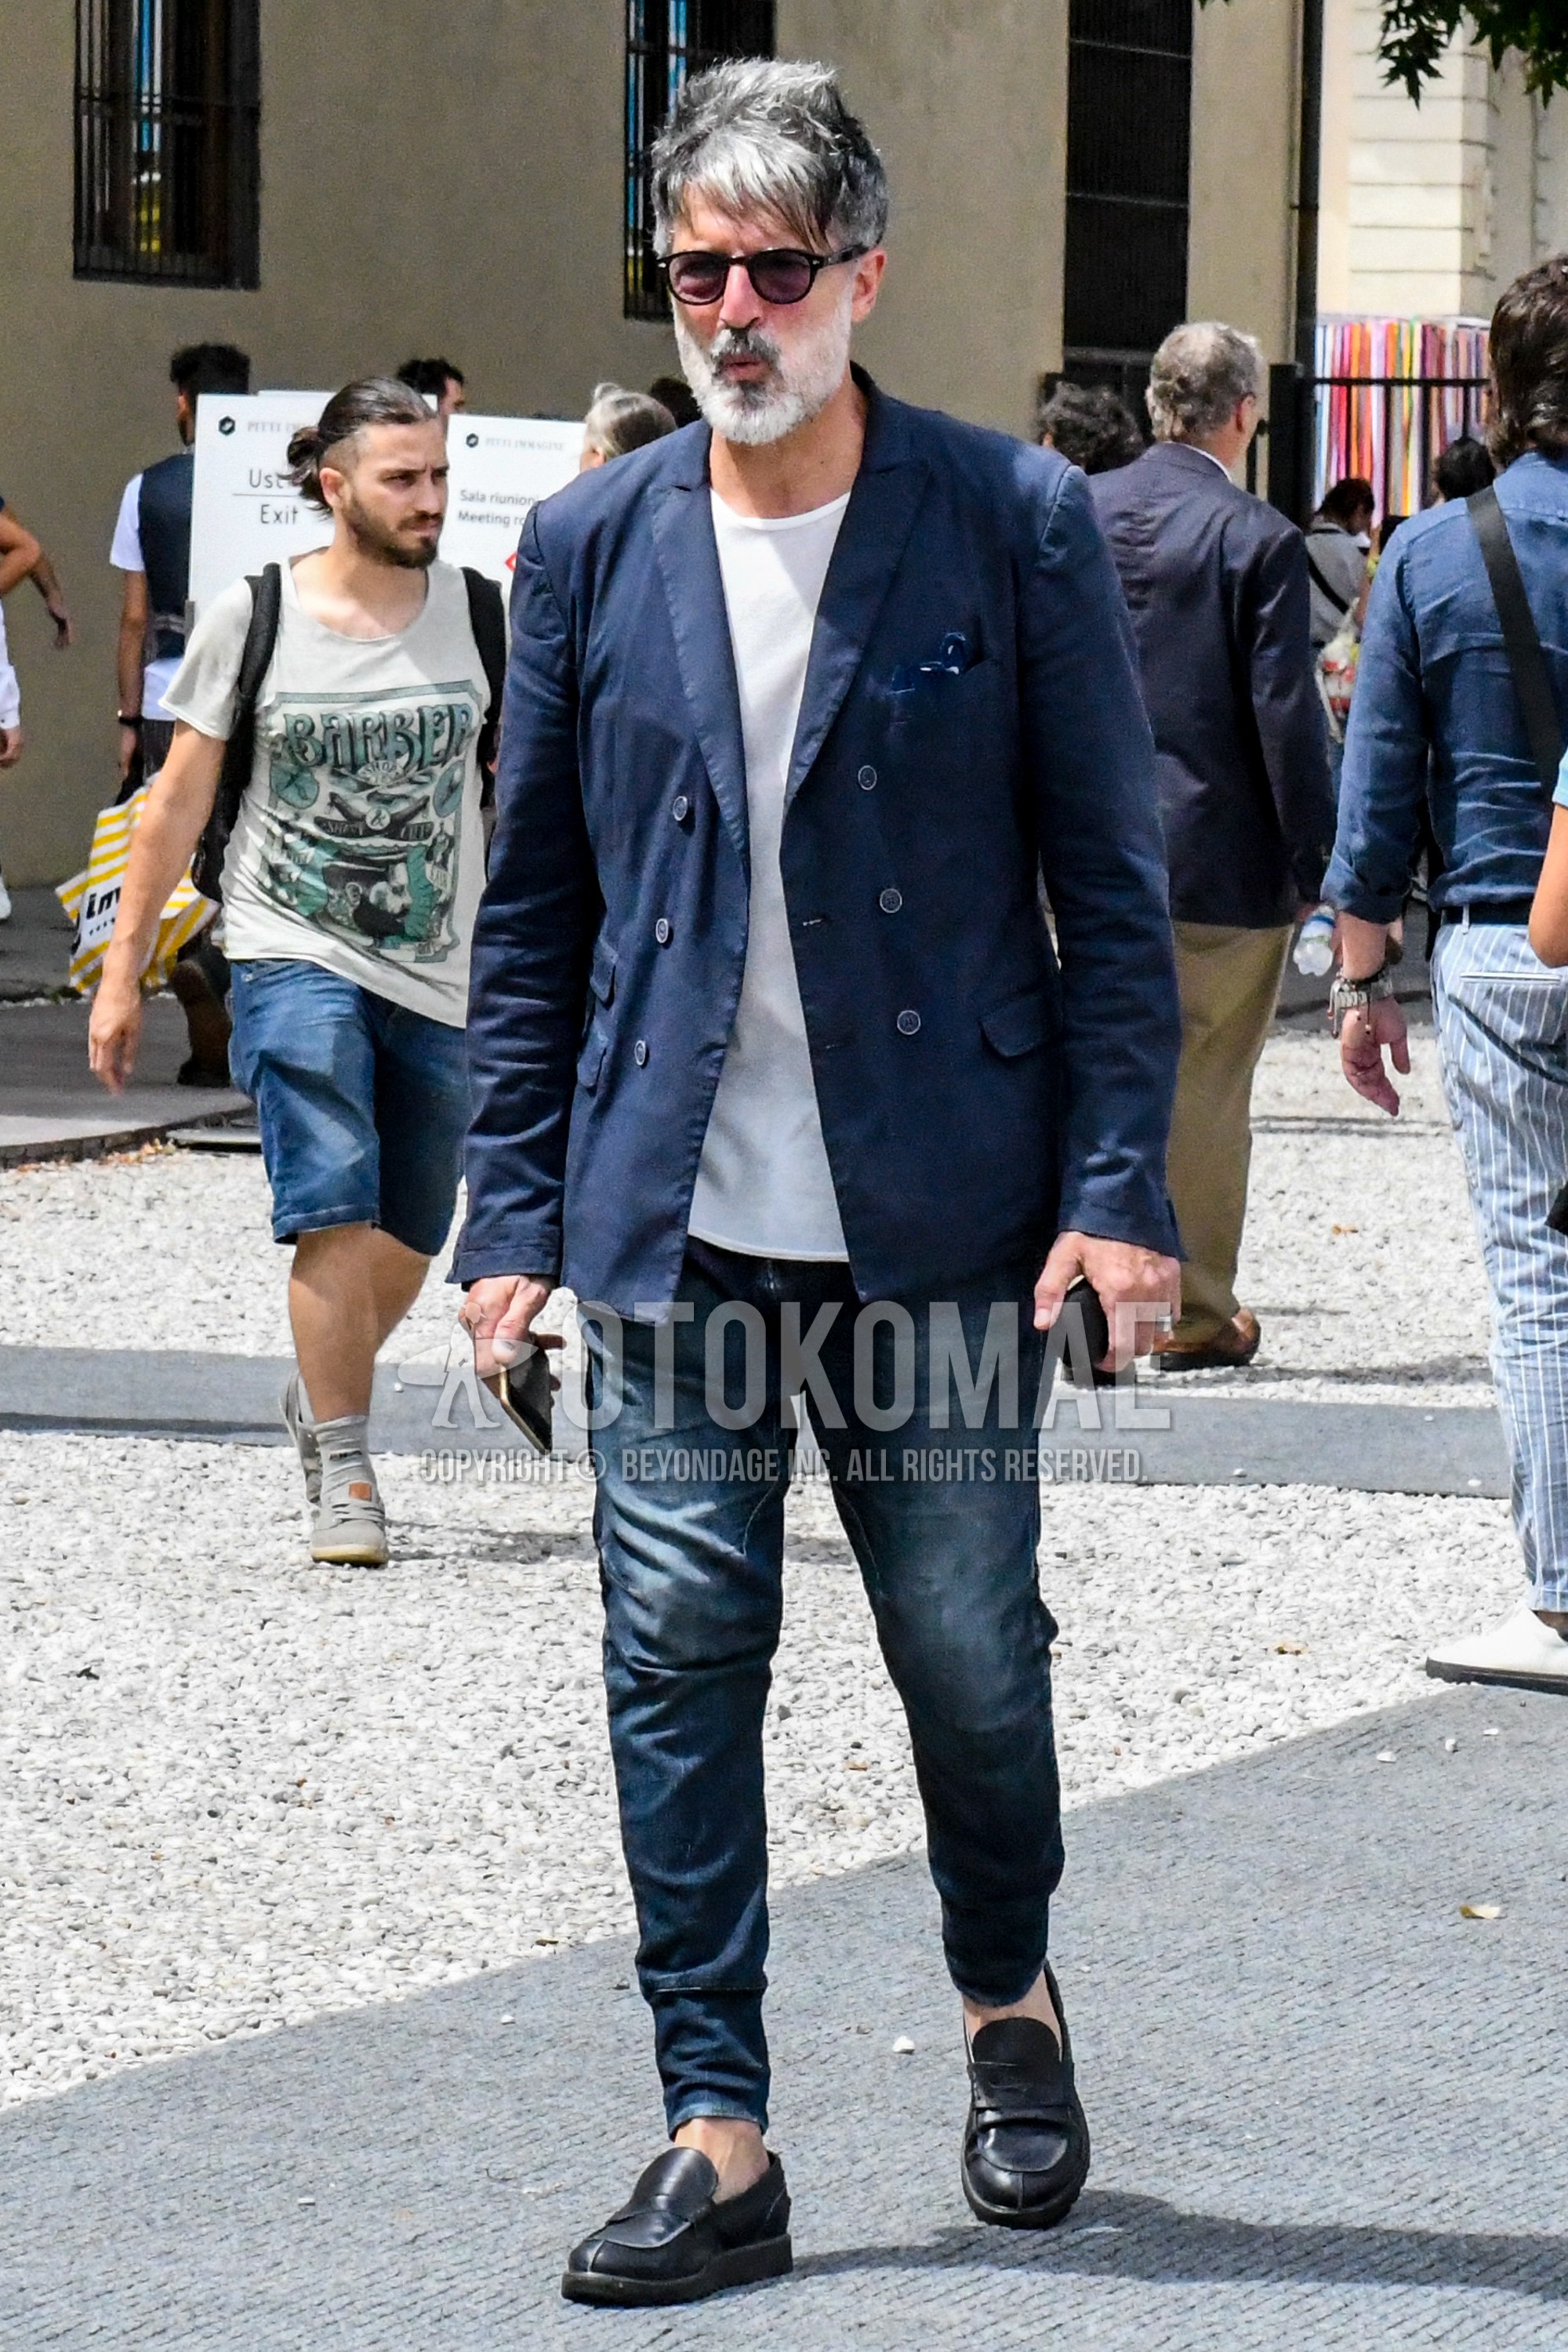 Men's spring summer autumn outfit with navy plain tailored jacket, white plain t-shirt, navy plain denim/jeans, black coin loafers leather shoes.